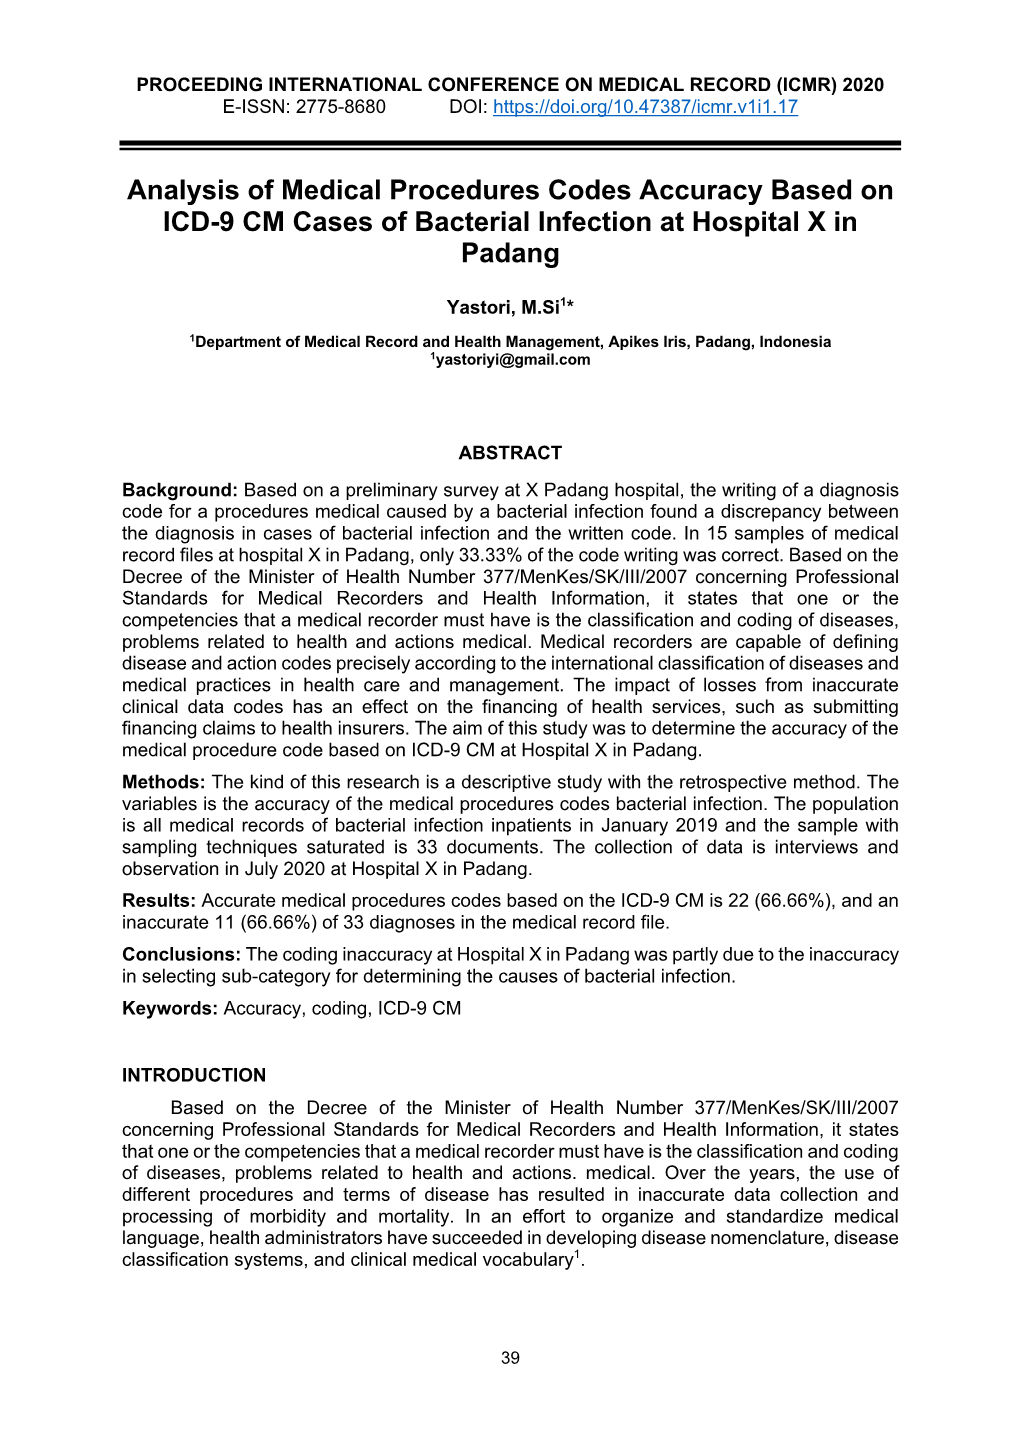 Analysis of Medical Procedures Codes Accuracy Based on ICD-9 CM Cases of Bacterial Infection at Hospital X in Padang